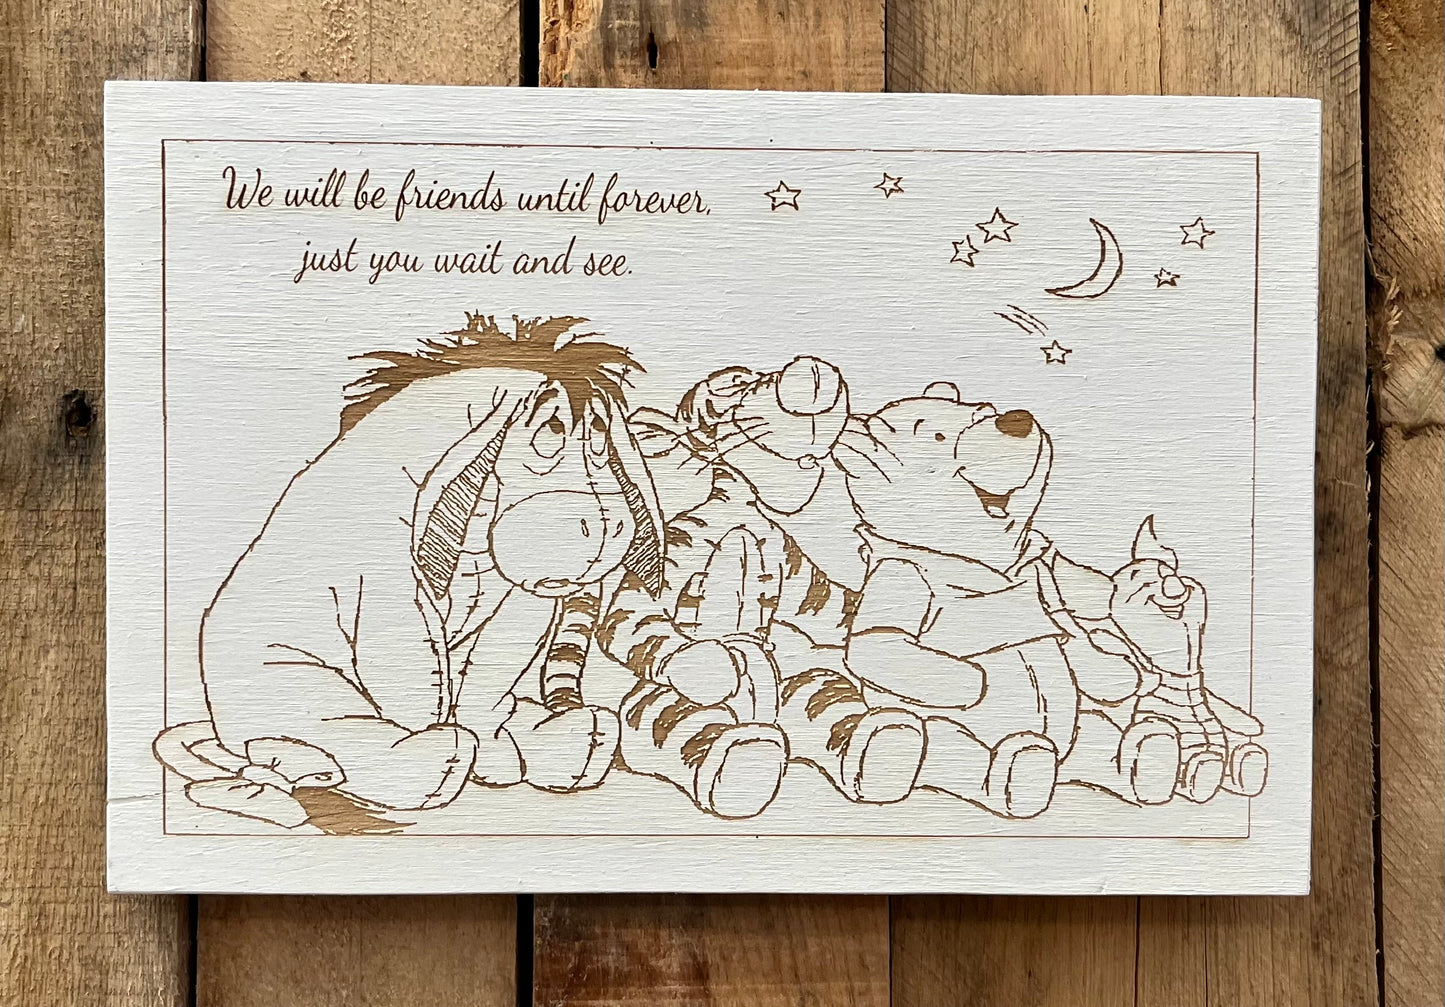 Classic Winnie The Pooh Sign - “We Will Be Friends Until Forever”